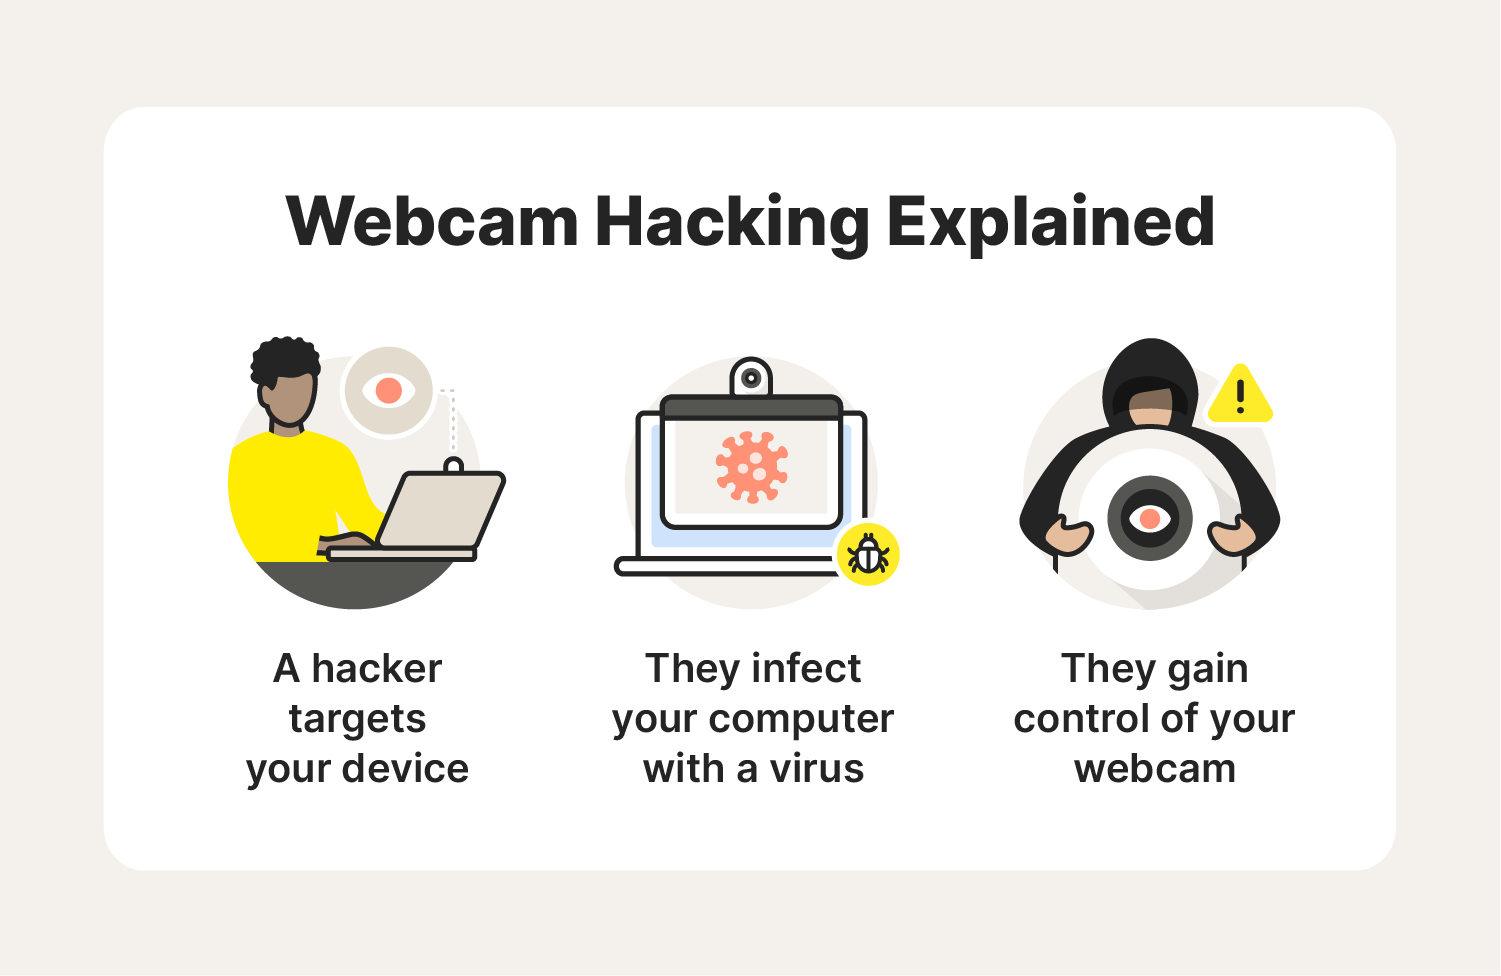 An illustration showing that webcam hacking occurs when the owner has possession of their device, and a hacker uses spyware to access it and intercept the webcam feed. 